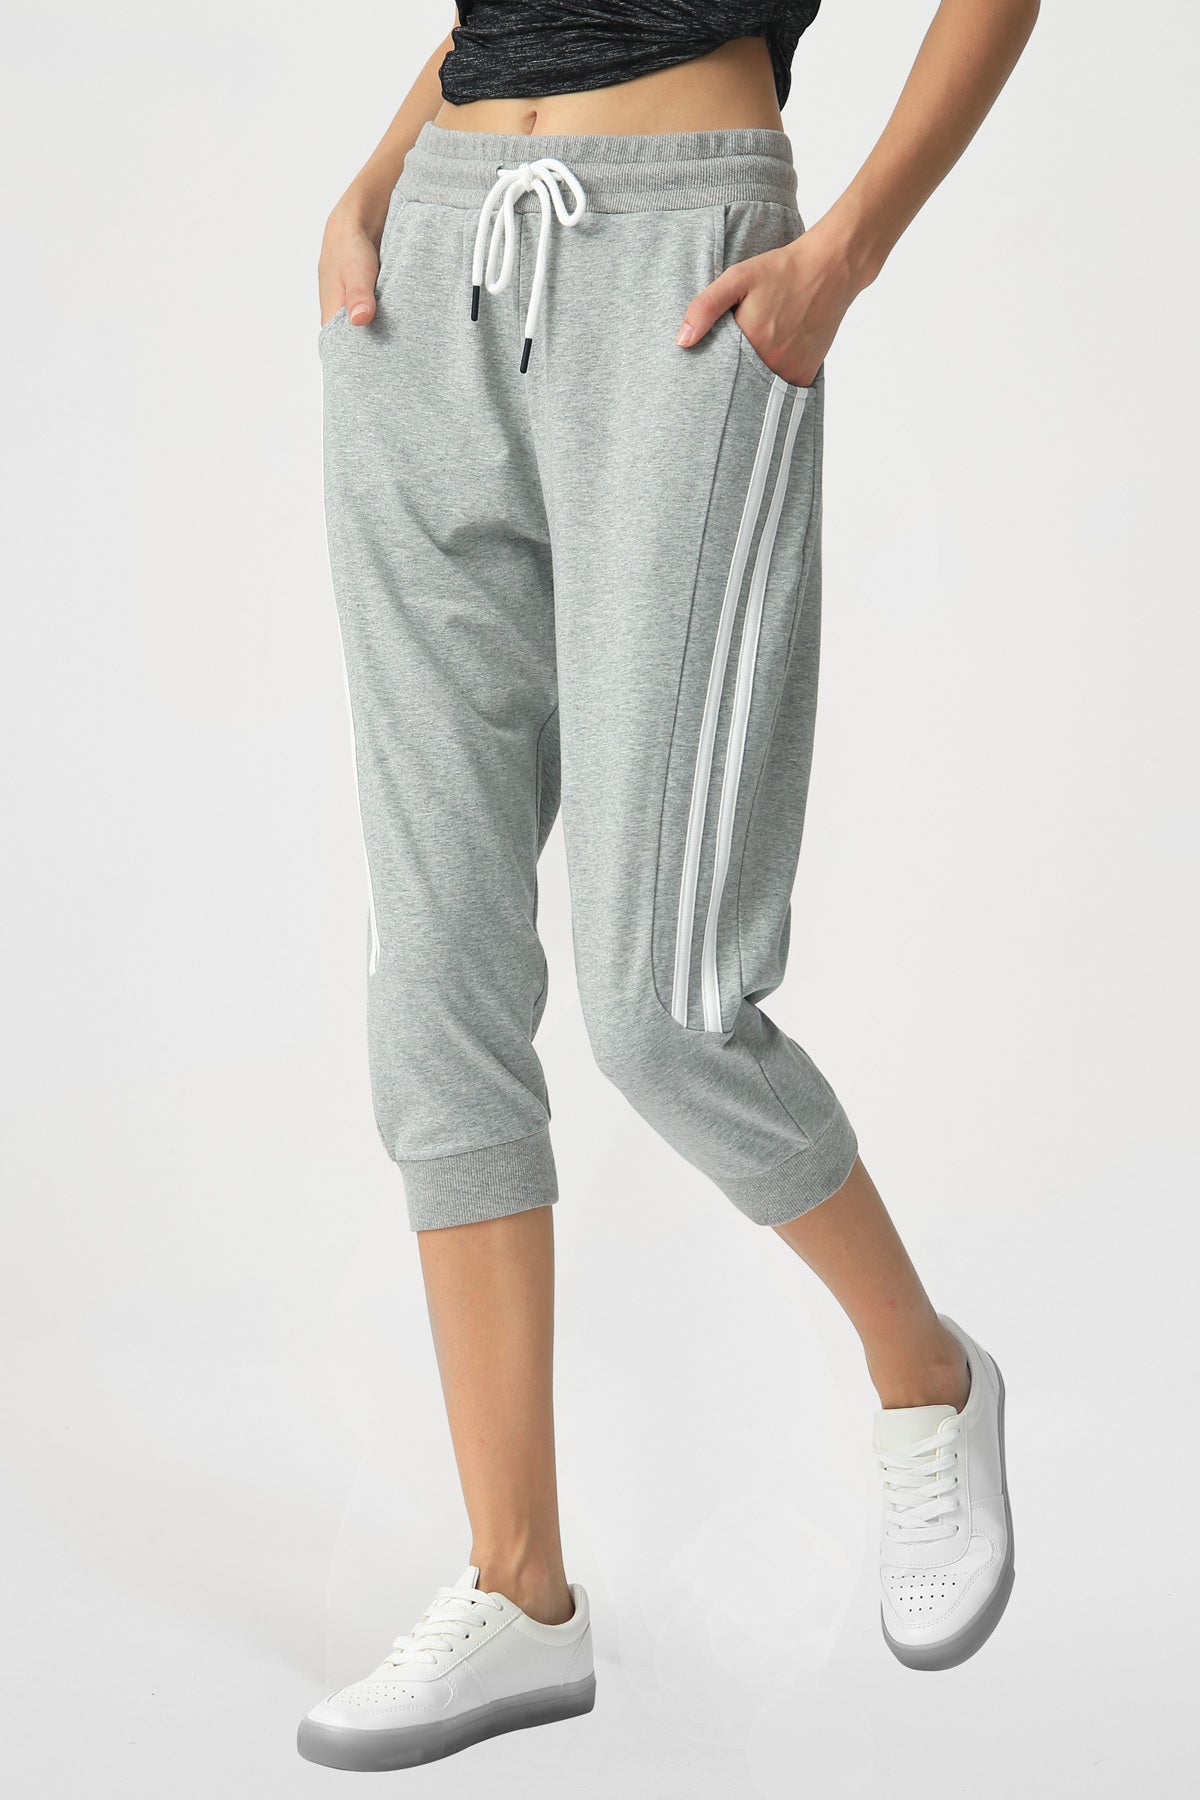 JWZUY Capri Sweatpants for Women Casual Cropped Joggers Athletic